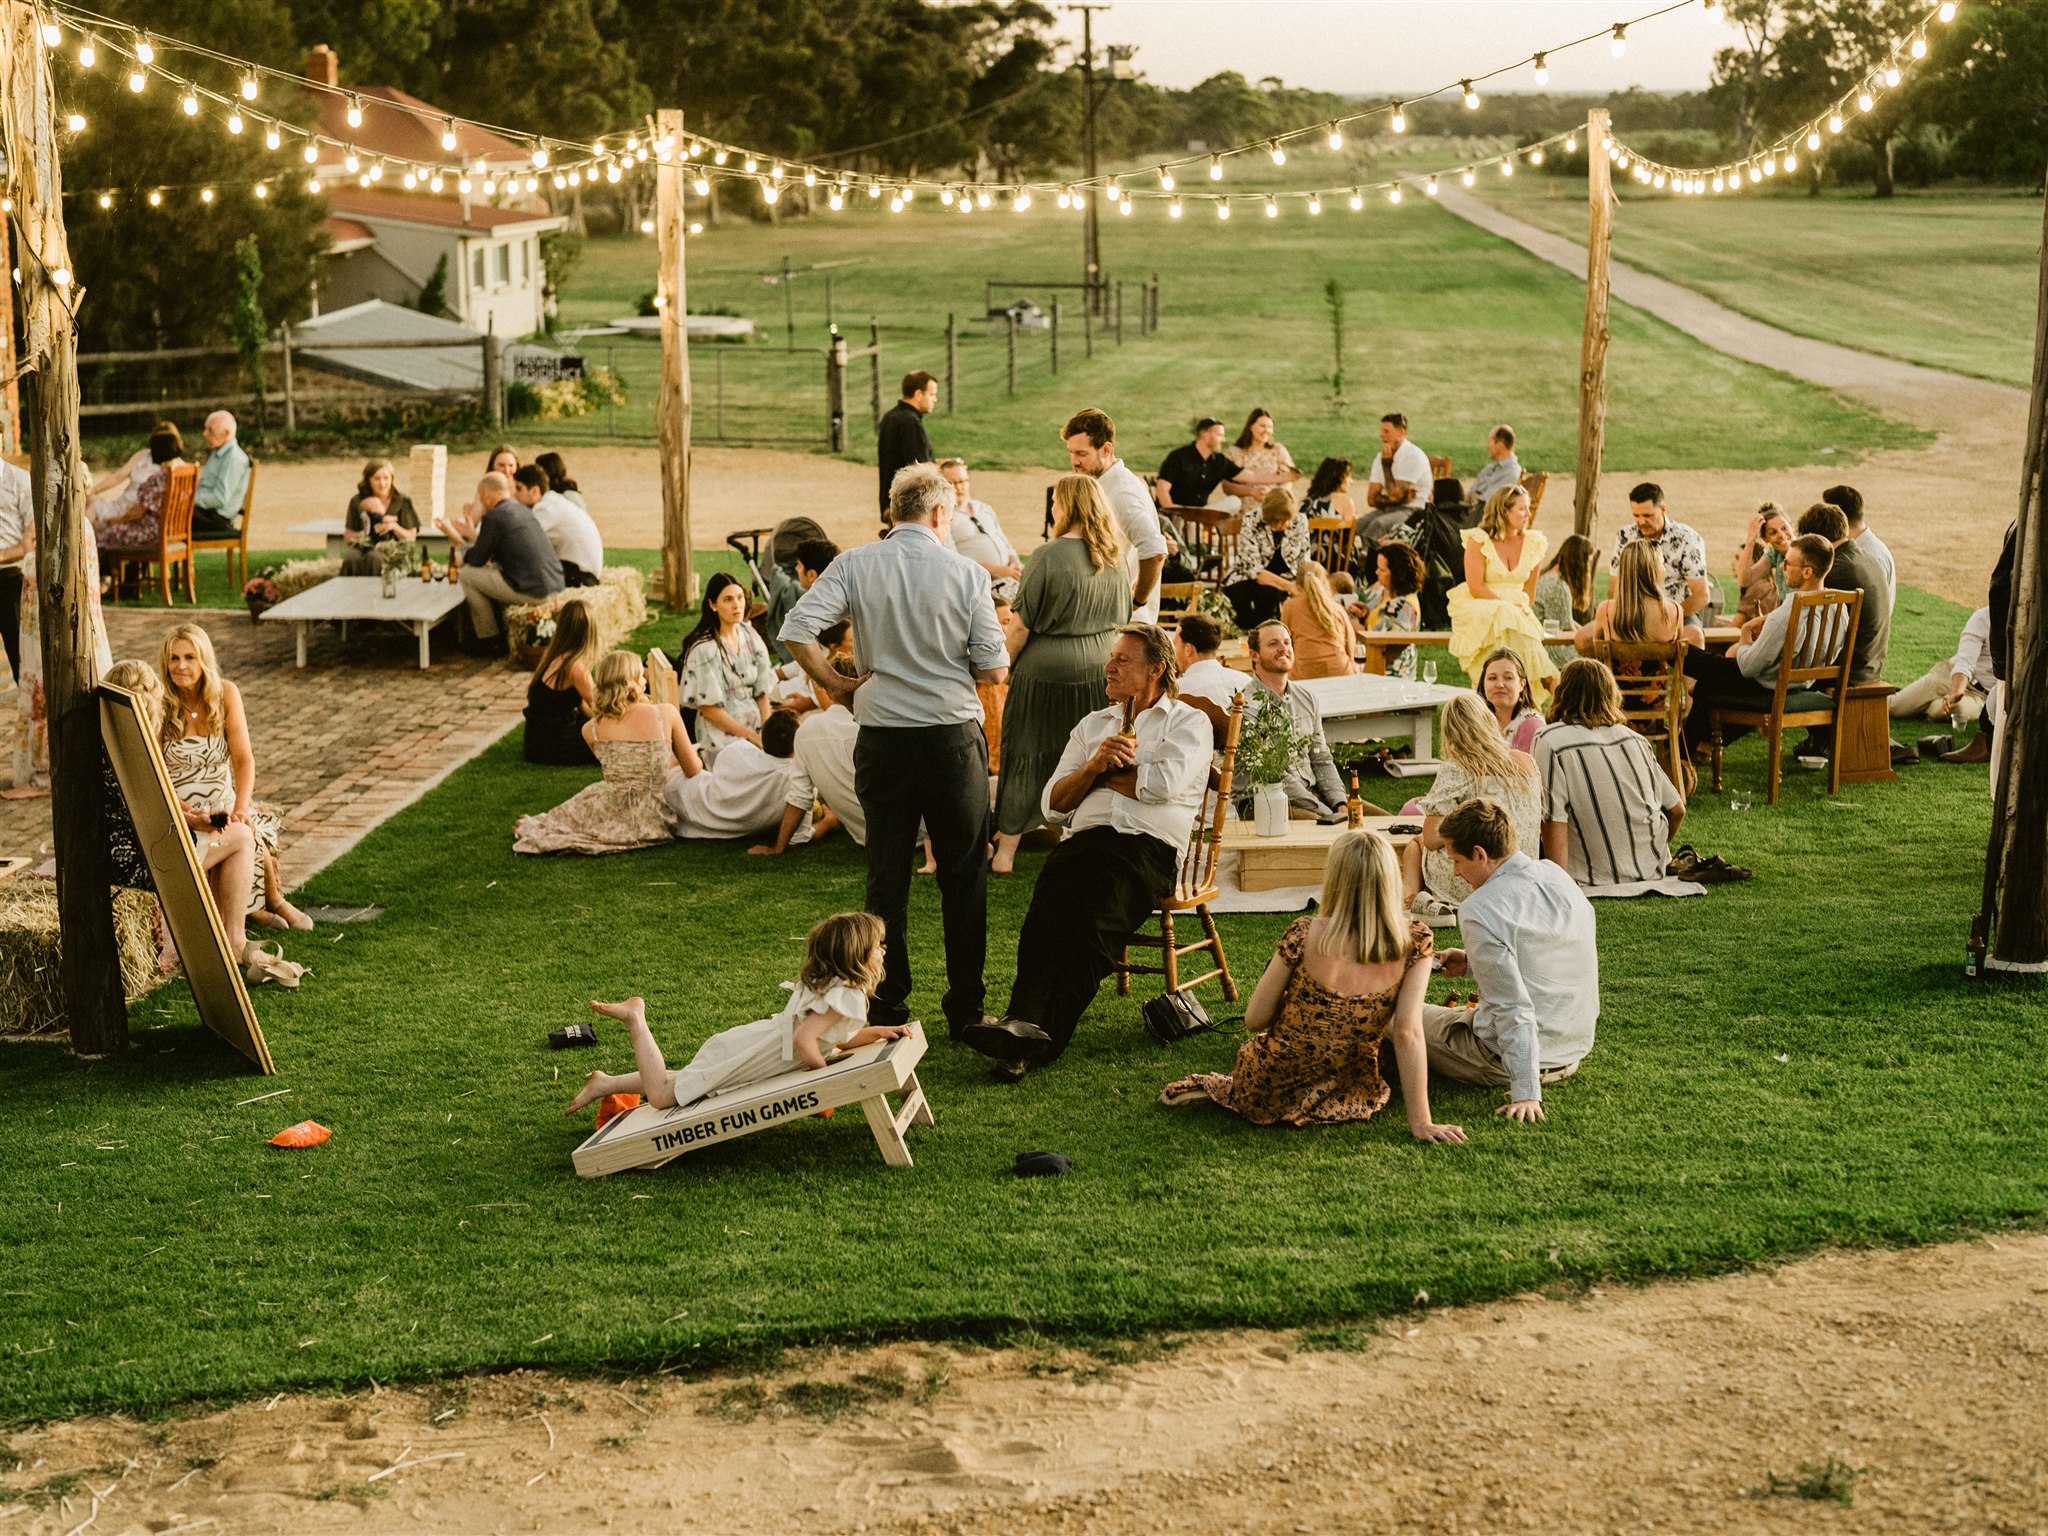 Stoney Creek Estate is a dry-hire venue located 45 minutes from Adelaide, just 4 minutes from Strathalbyn in the lush bushland of the Fleurieu Peninsula, featuring a stunning stone barn function space, accommodation on site and flexible beverages and catering.